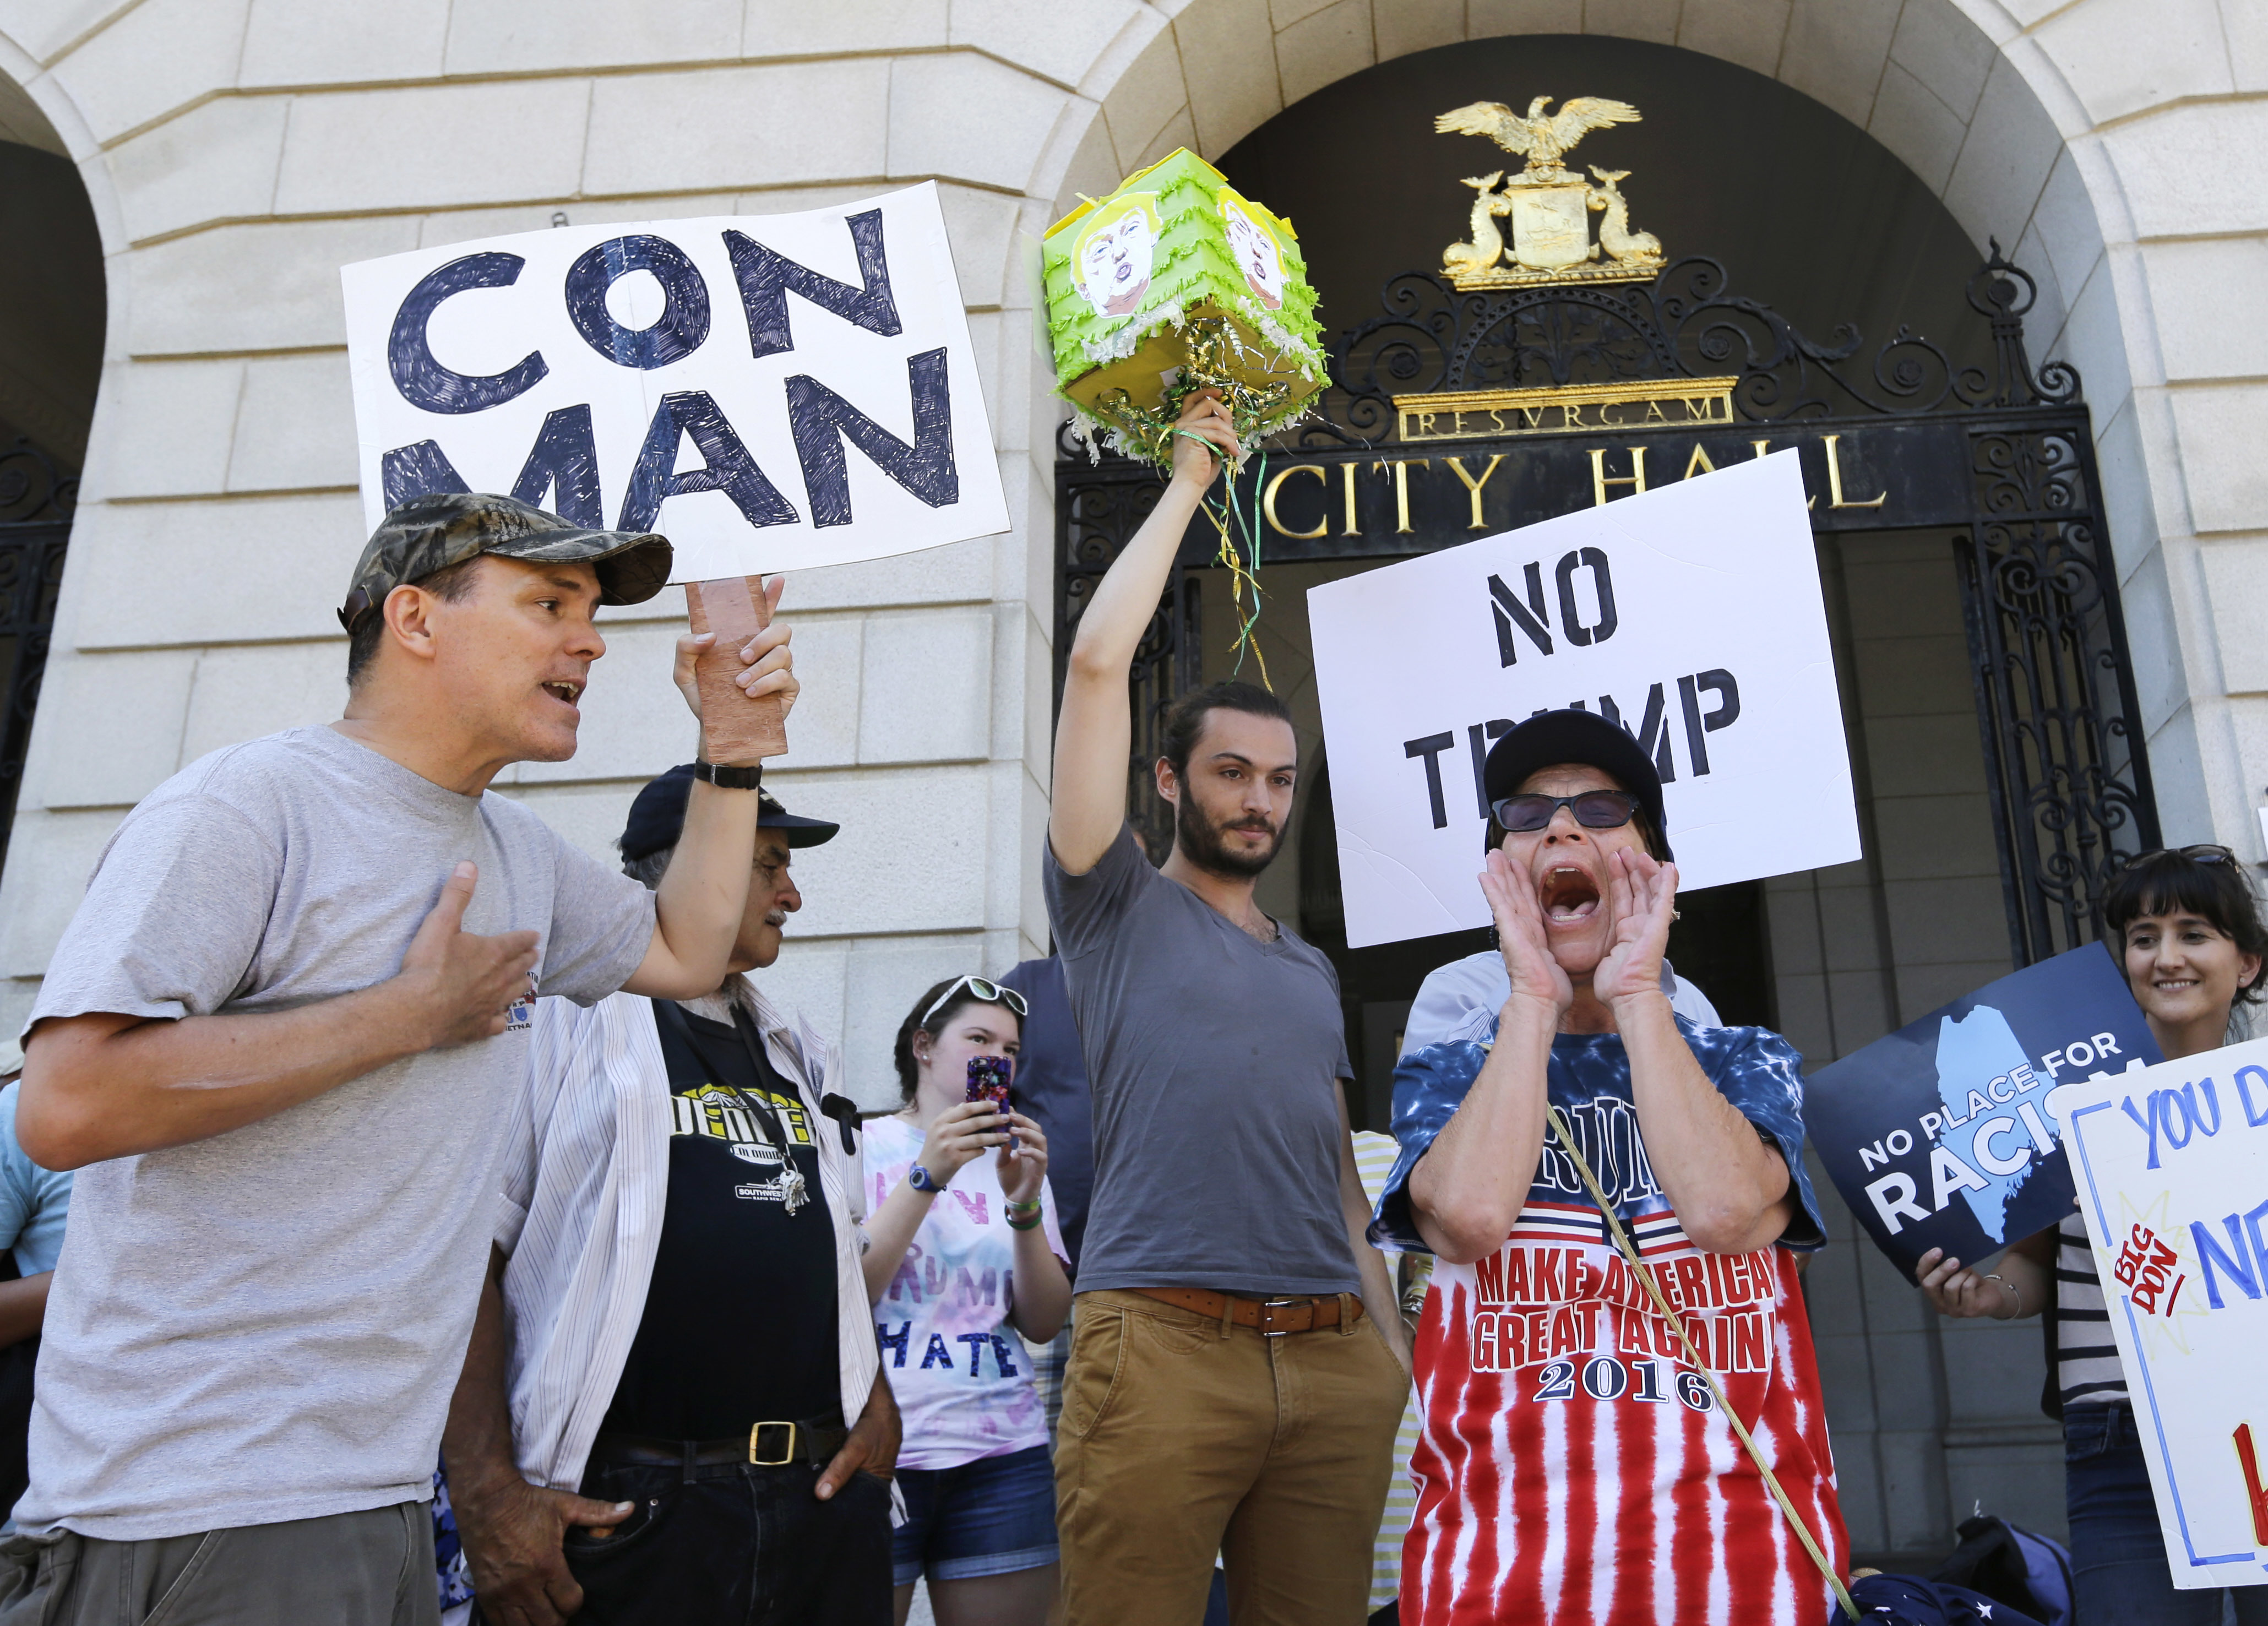 Catherine Ferrell, right, of Greene, Maine, a supporter of Republican presidential candidate Donald Trump, yells as Alex Lange, far left, of Portland, Maine argues with her at a demonstration outside Portland City Hall, Thursday, Aug. 4, 2016, near Trump's campaign appearance at Merrill Auditorium. (AP Photo/Elise Amendola)